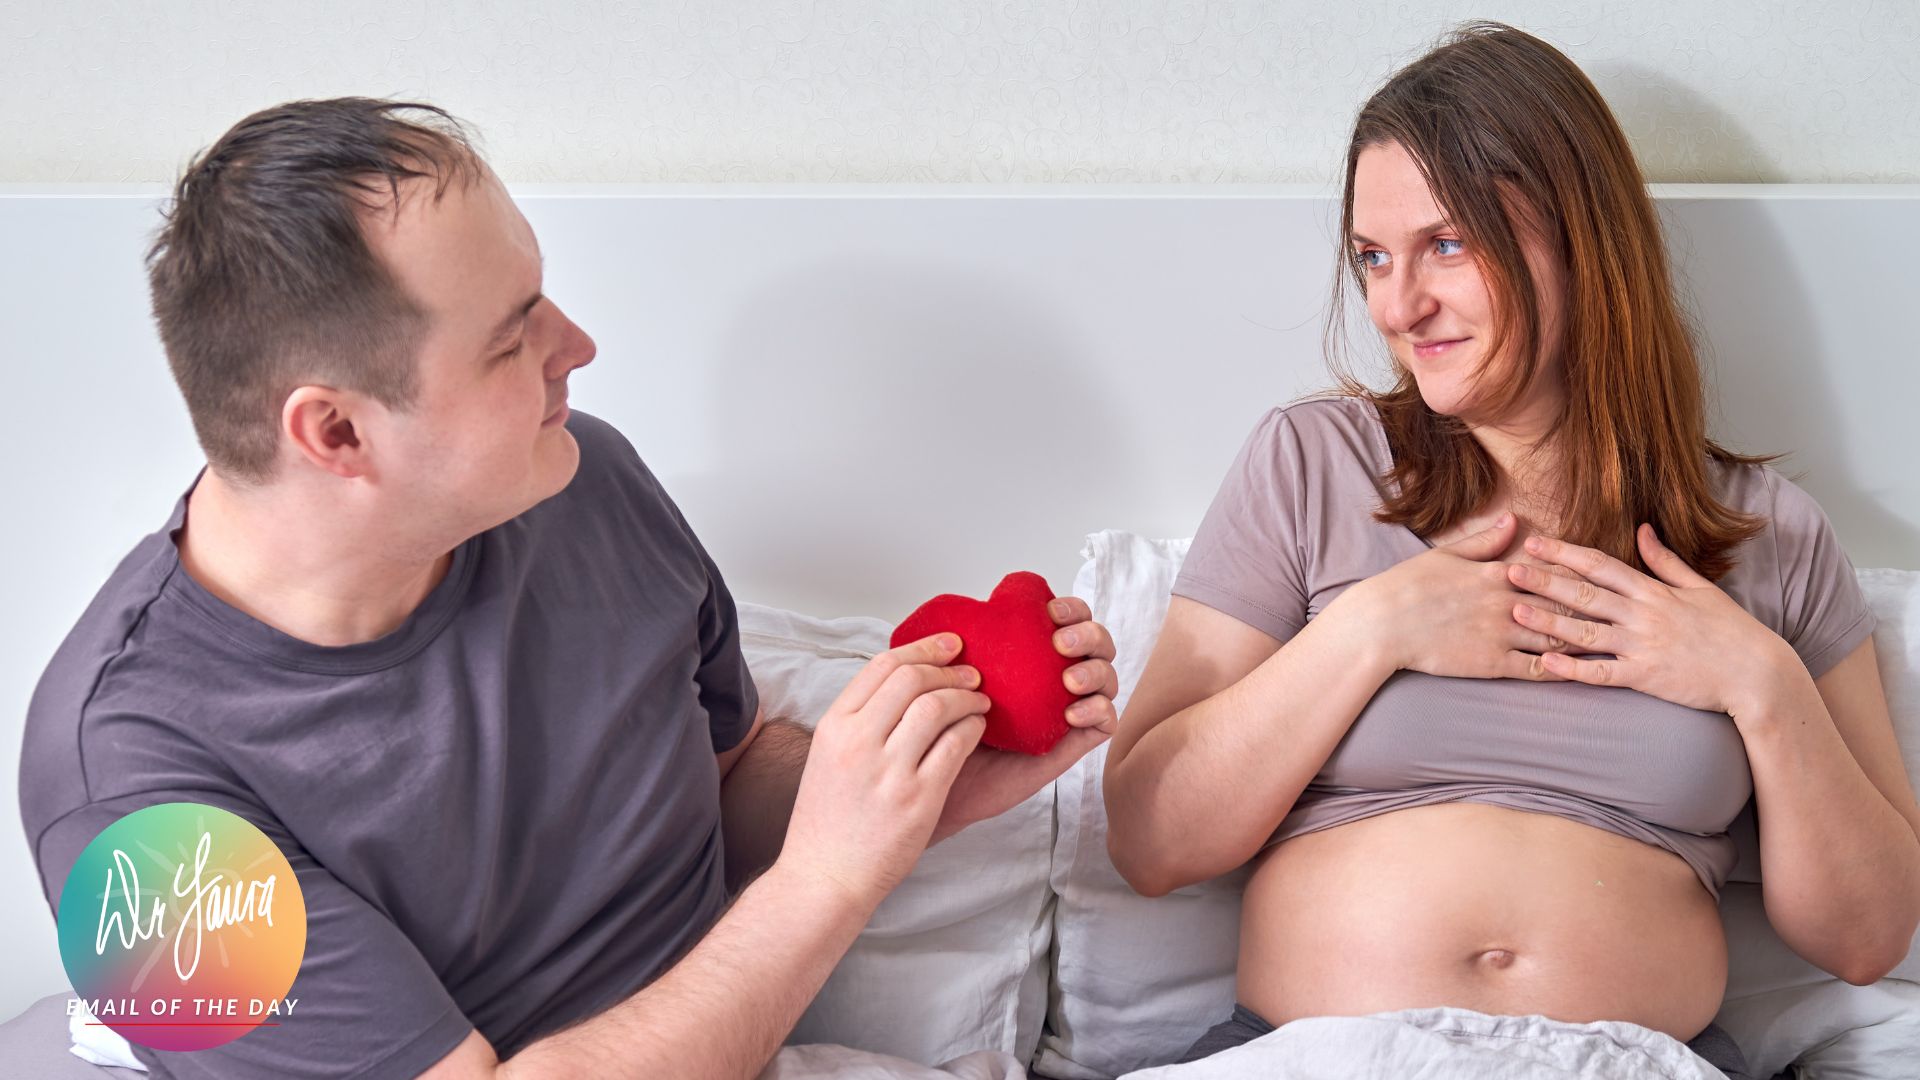 Woman in beige shirt with an exposed pregnant belly smiles at man sitting next to her in bed and offering a red heart plush